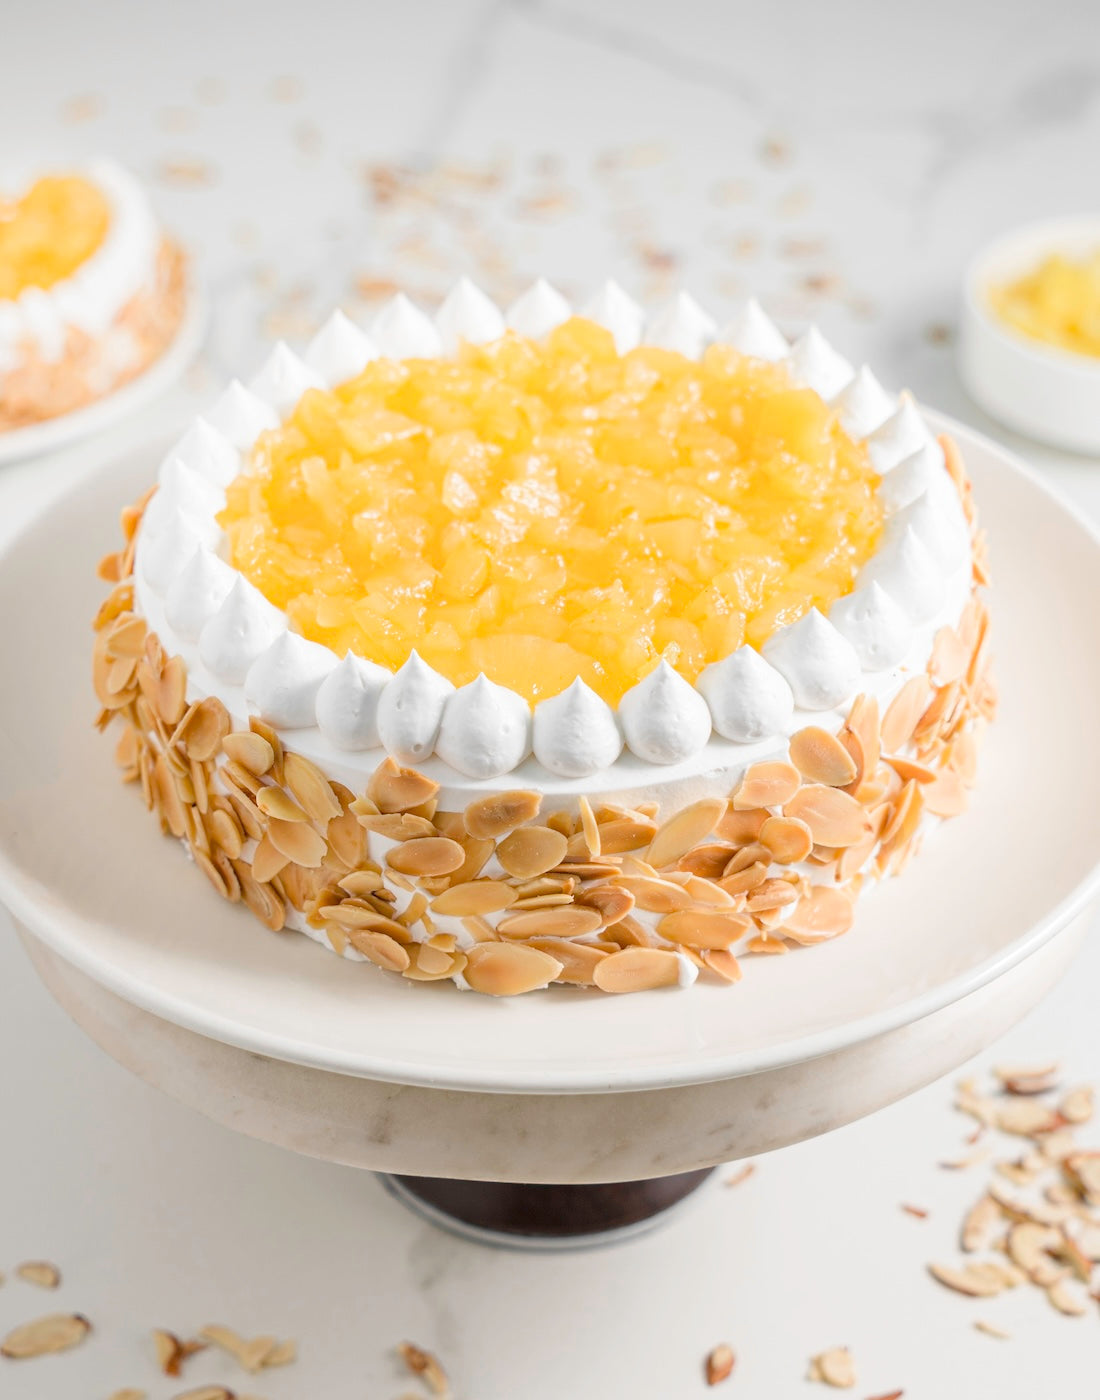 Order Cake Online, 3 Hour Delivery in Noida, Pineapple Cake, 500 Gms